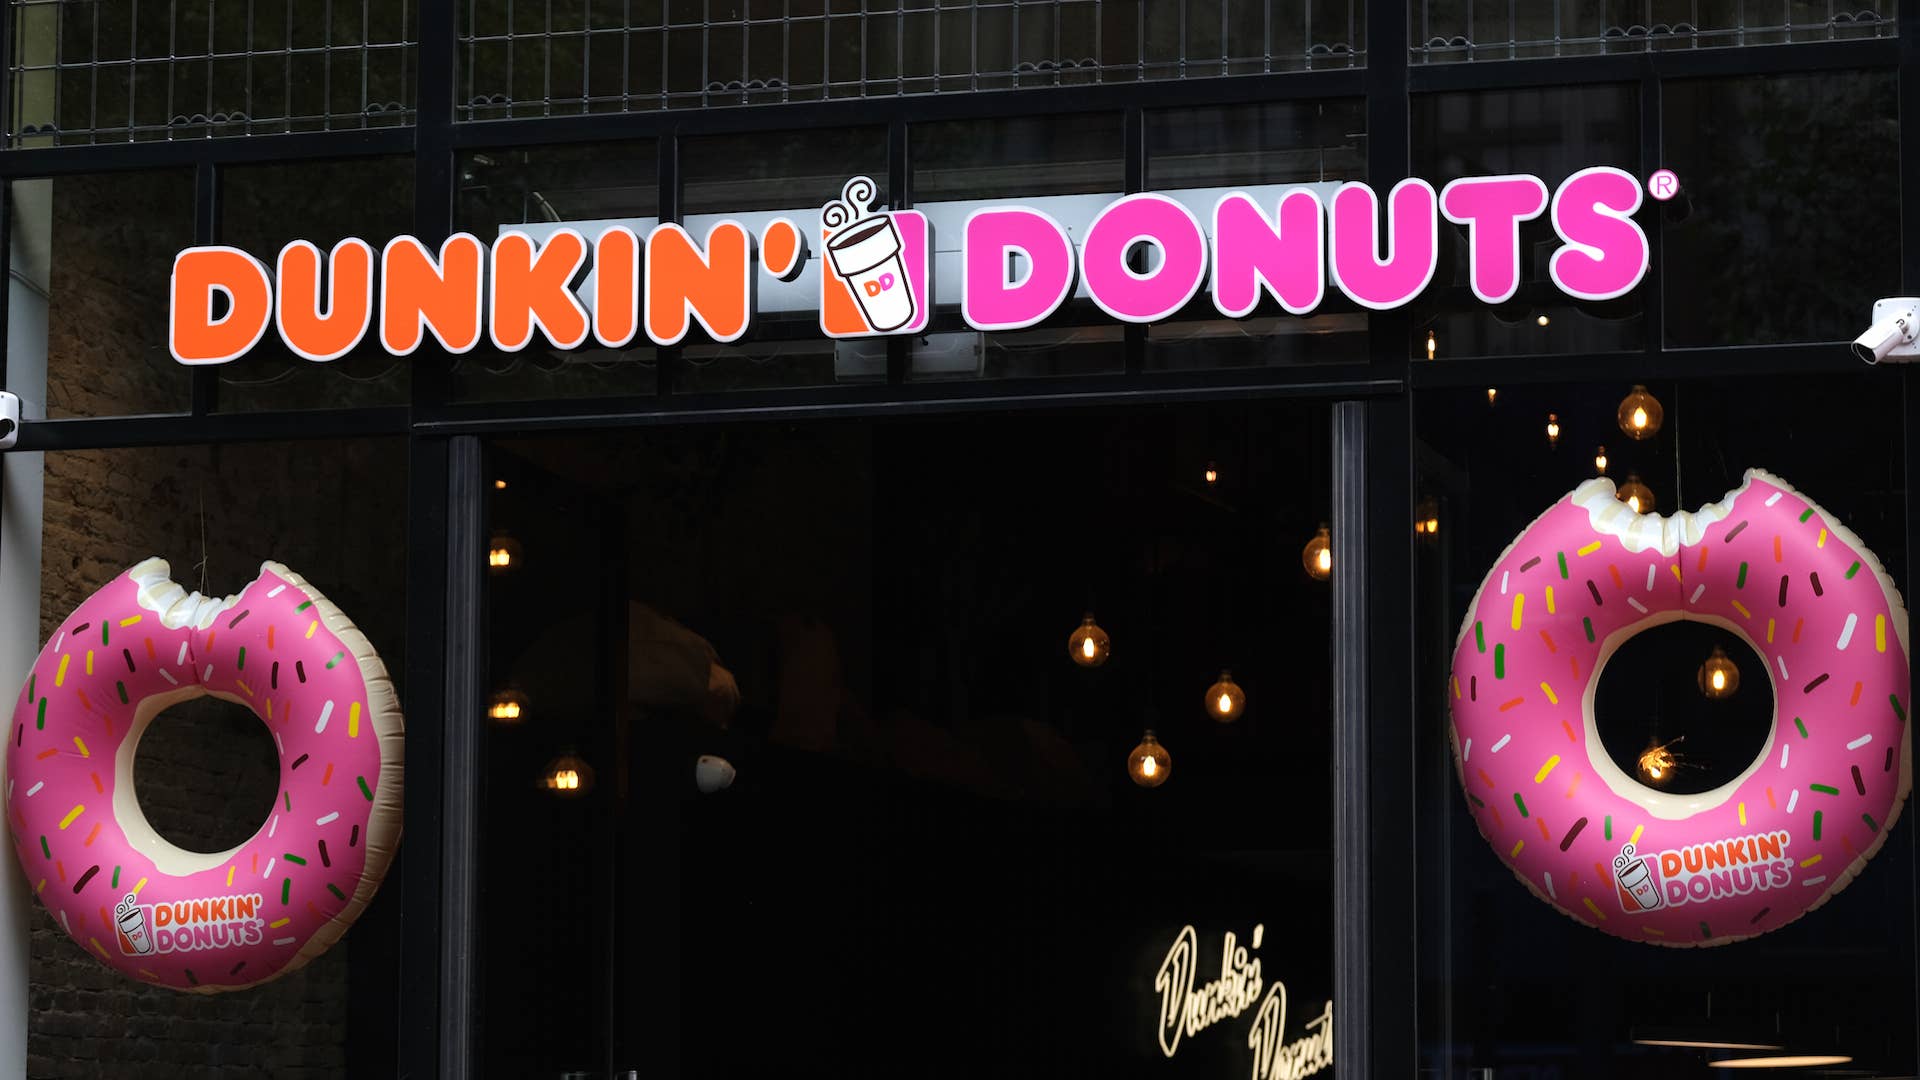 A logo of Dunkin' Donuts is seen at the entrance of its store